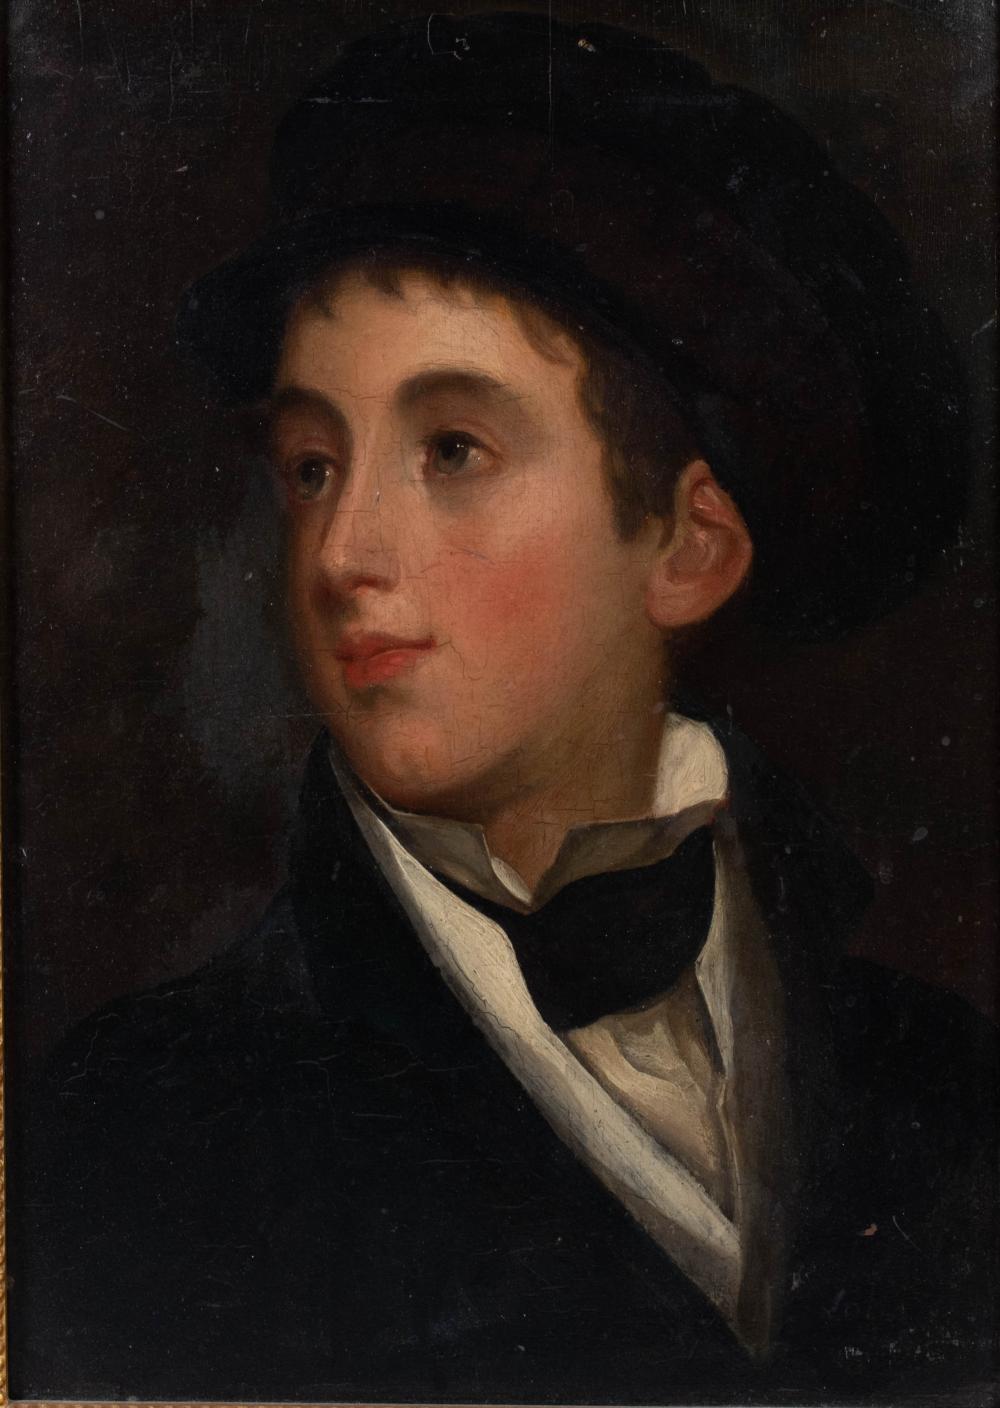 19TH CENTURY, PORTRAIT OF A YOUNG